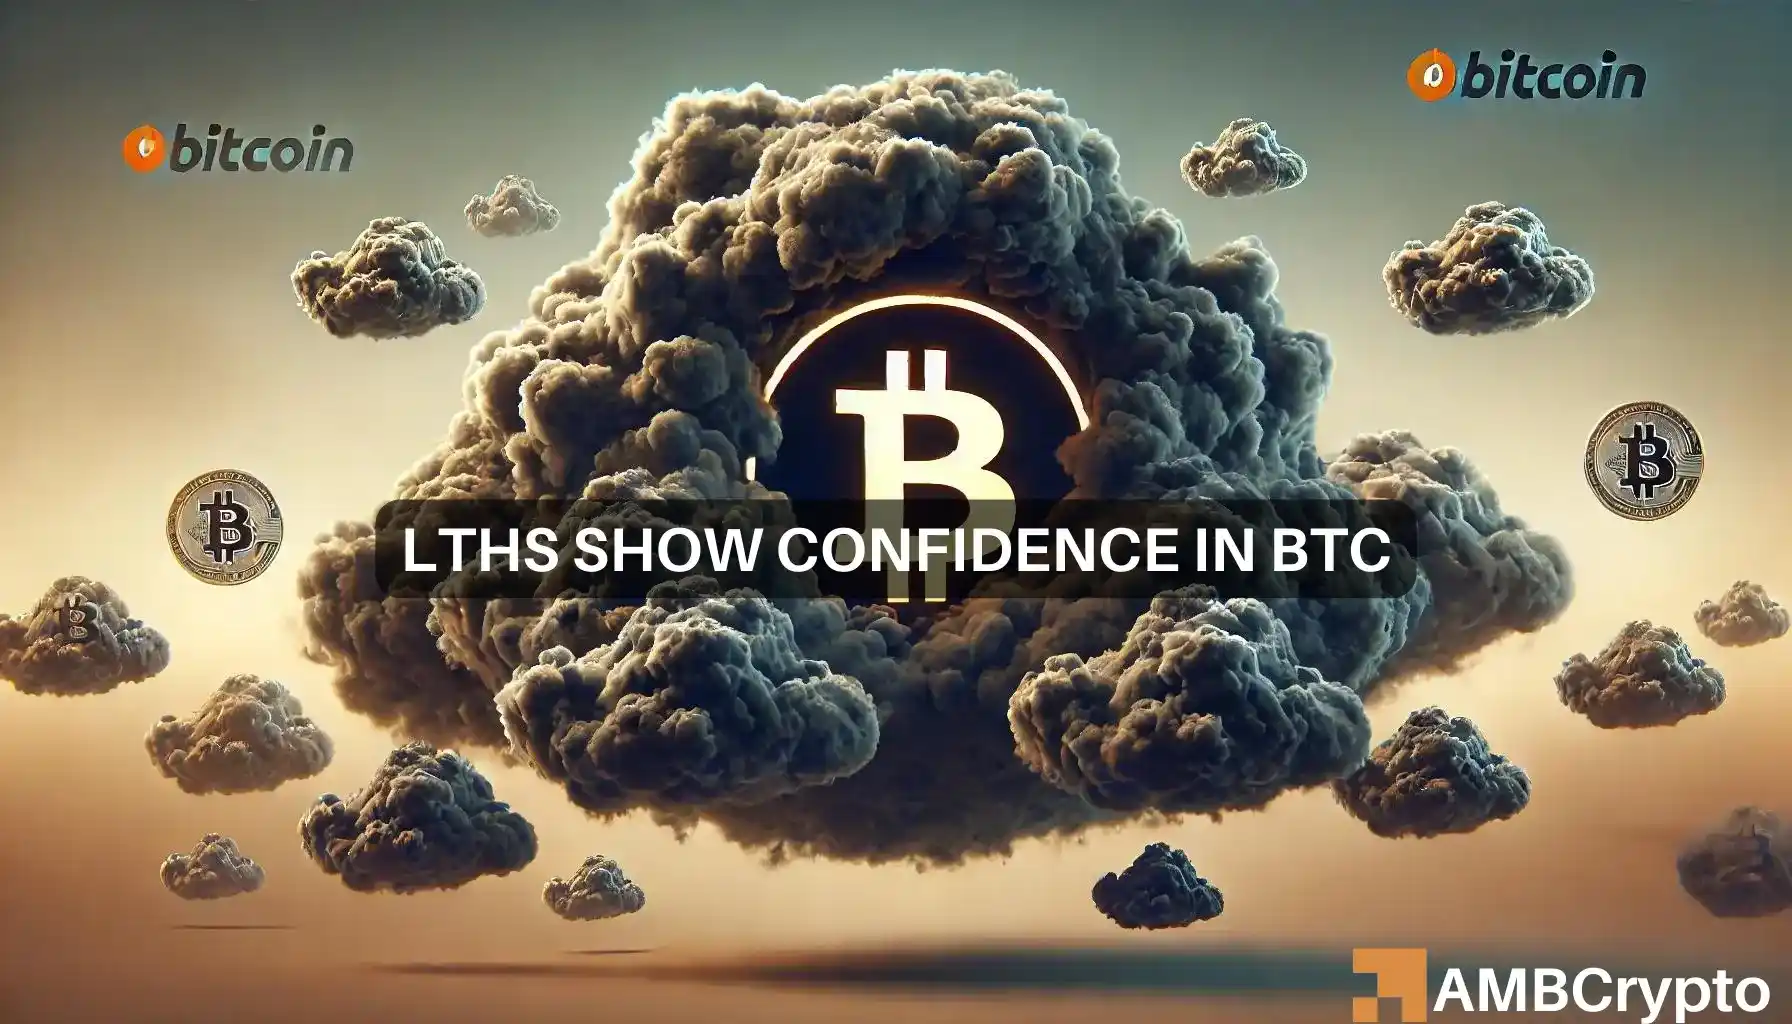 Long-term holders show confidence in Bitcoin